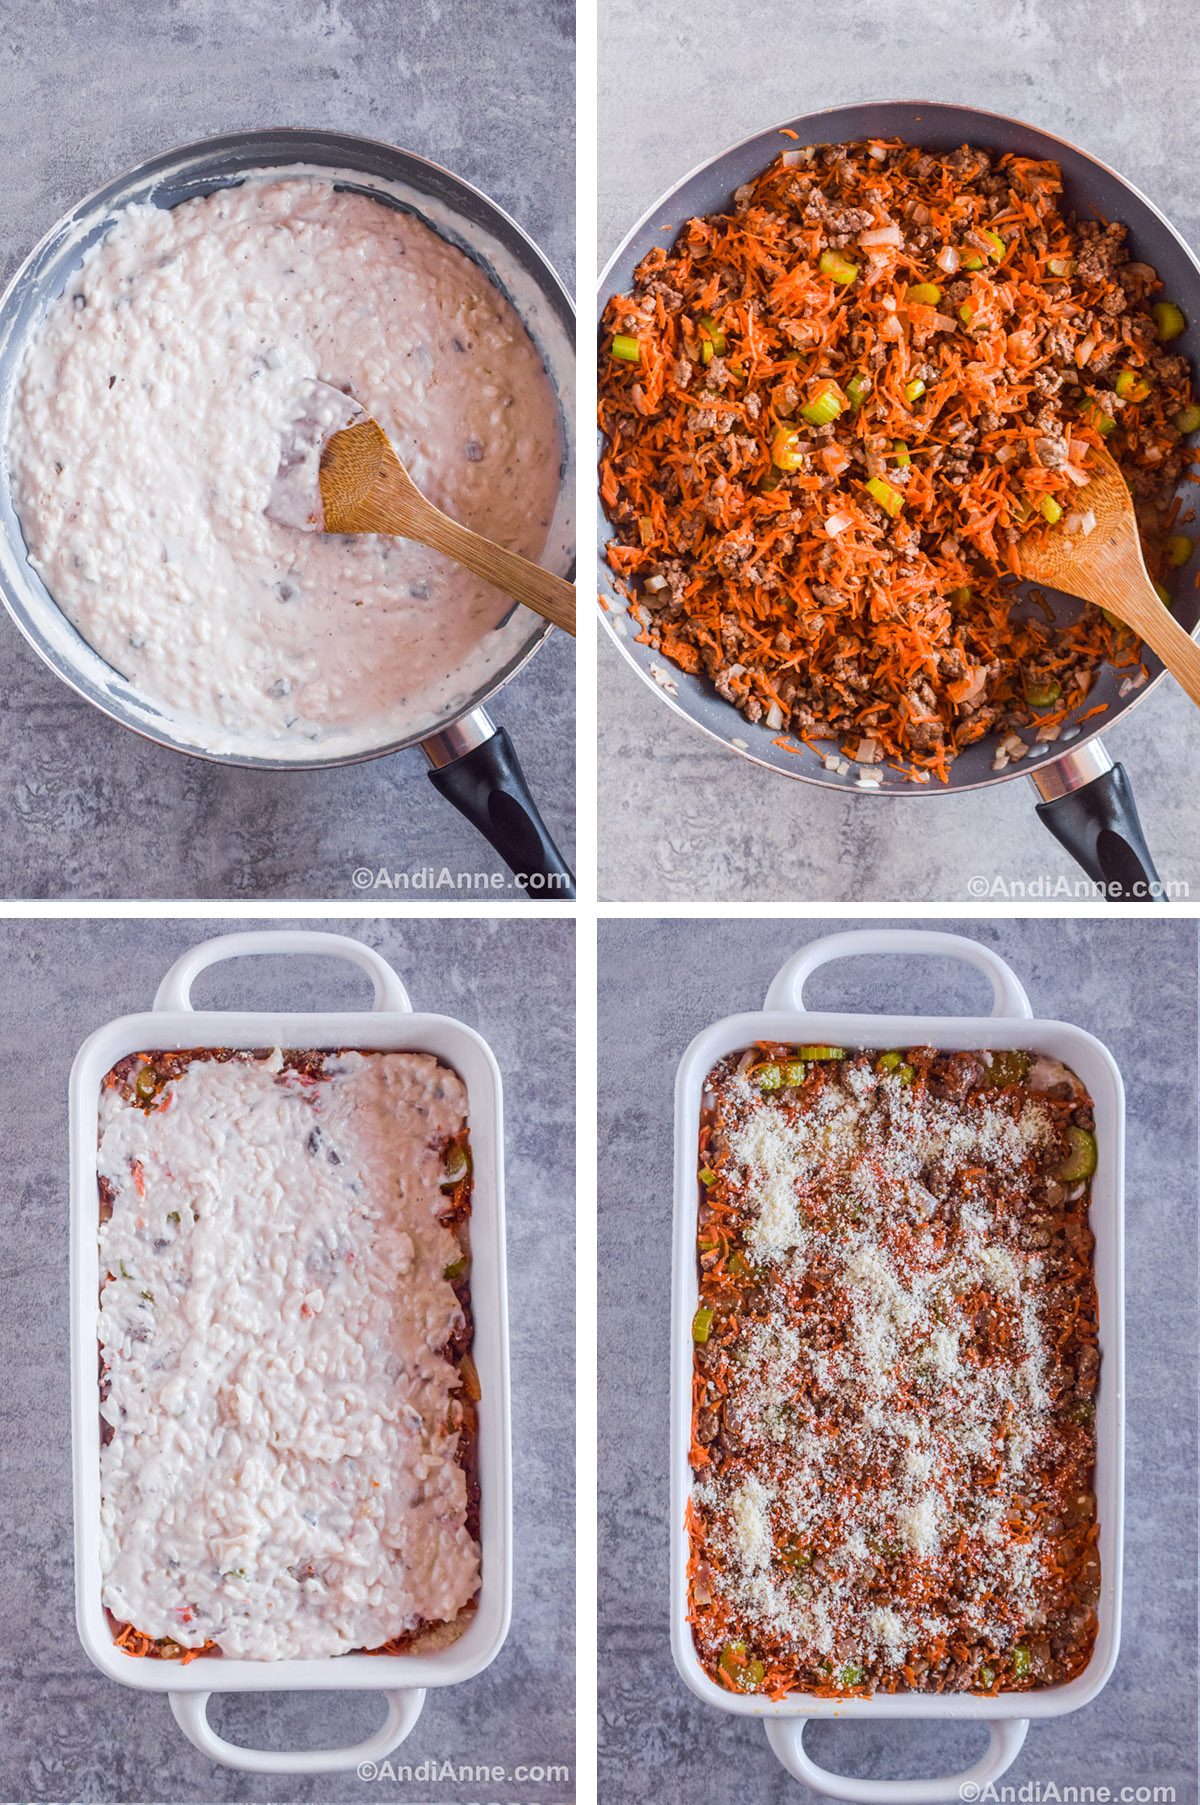 Four images showing steps to make recipe. First is white creamy sauce in frying pan. Second is ground beef and shredded carrots in frying pan with wood spoon. Fourth is White casserole dish with creamy sauce poured in. Fourth is ground beef carrot mixture with grated parmesan on top in casserole dish.